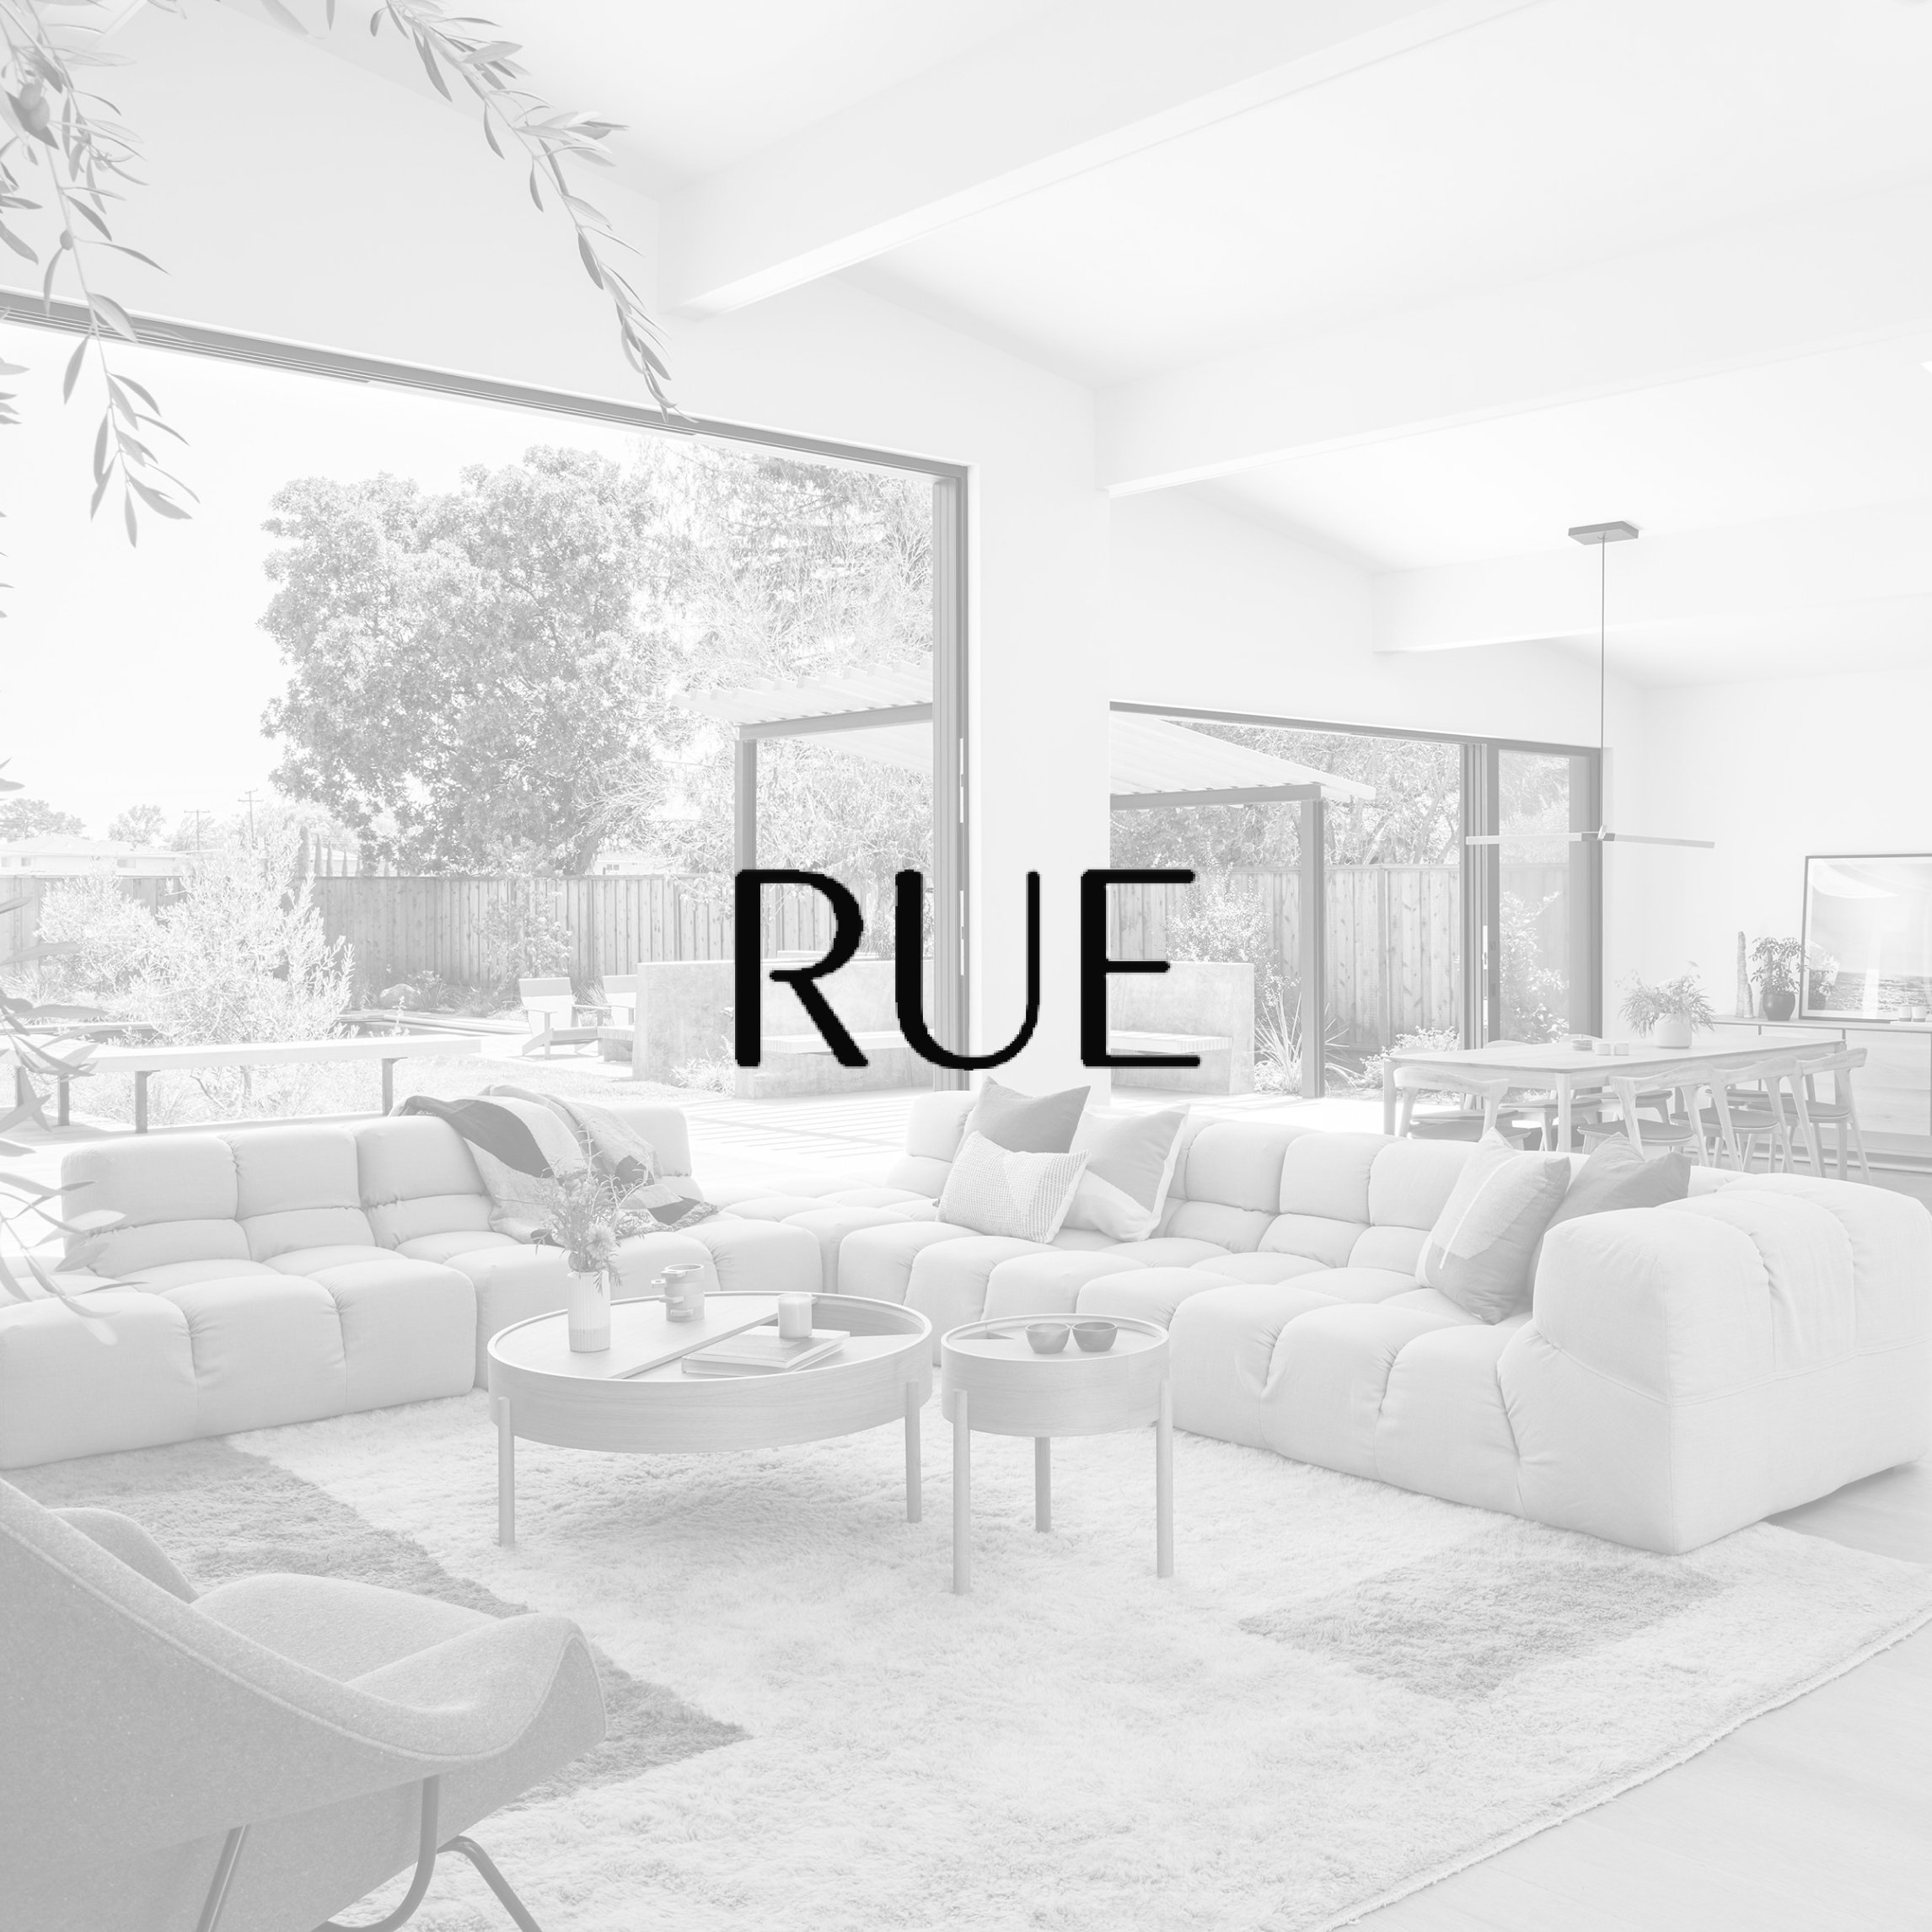  Rue: A Cool Collaboration | The power of teamwork shines bright in a creative northern California home 